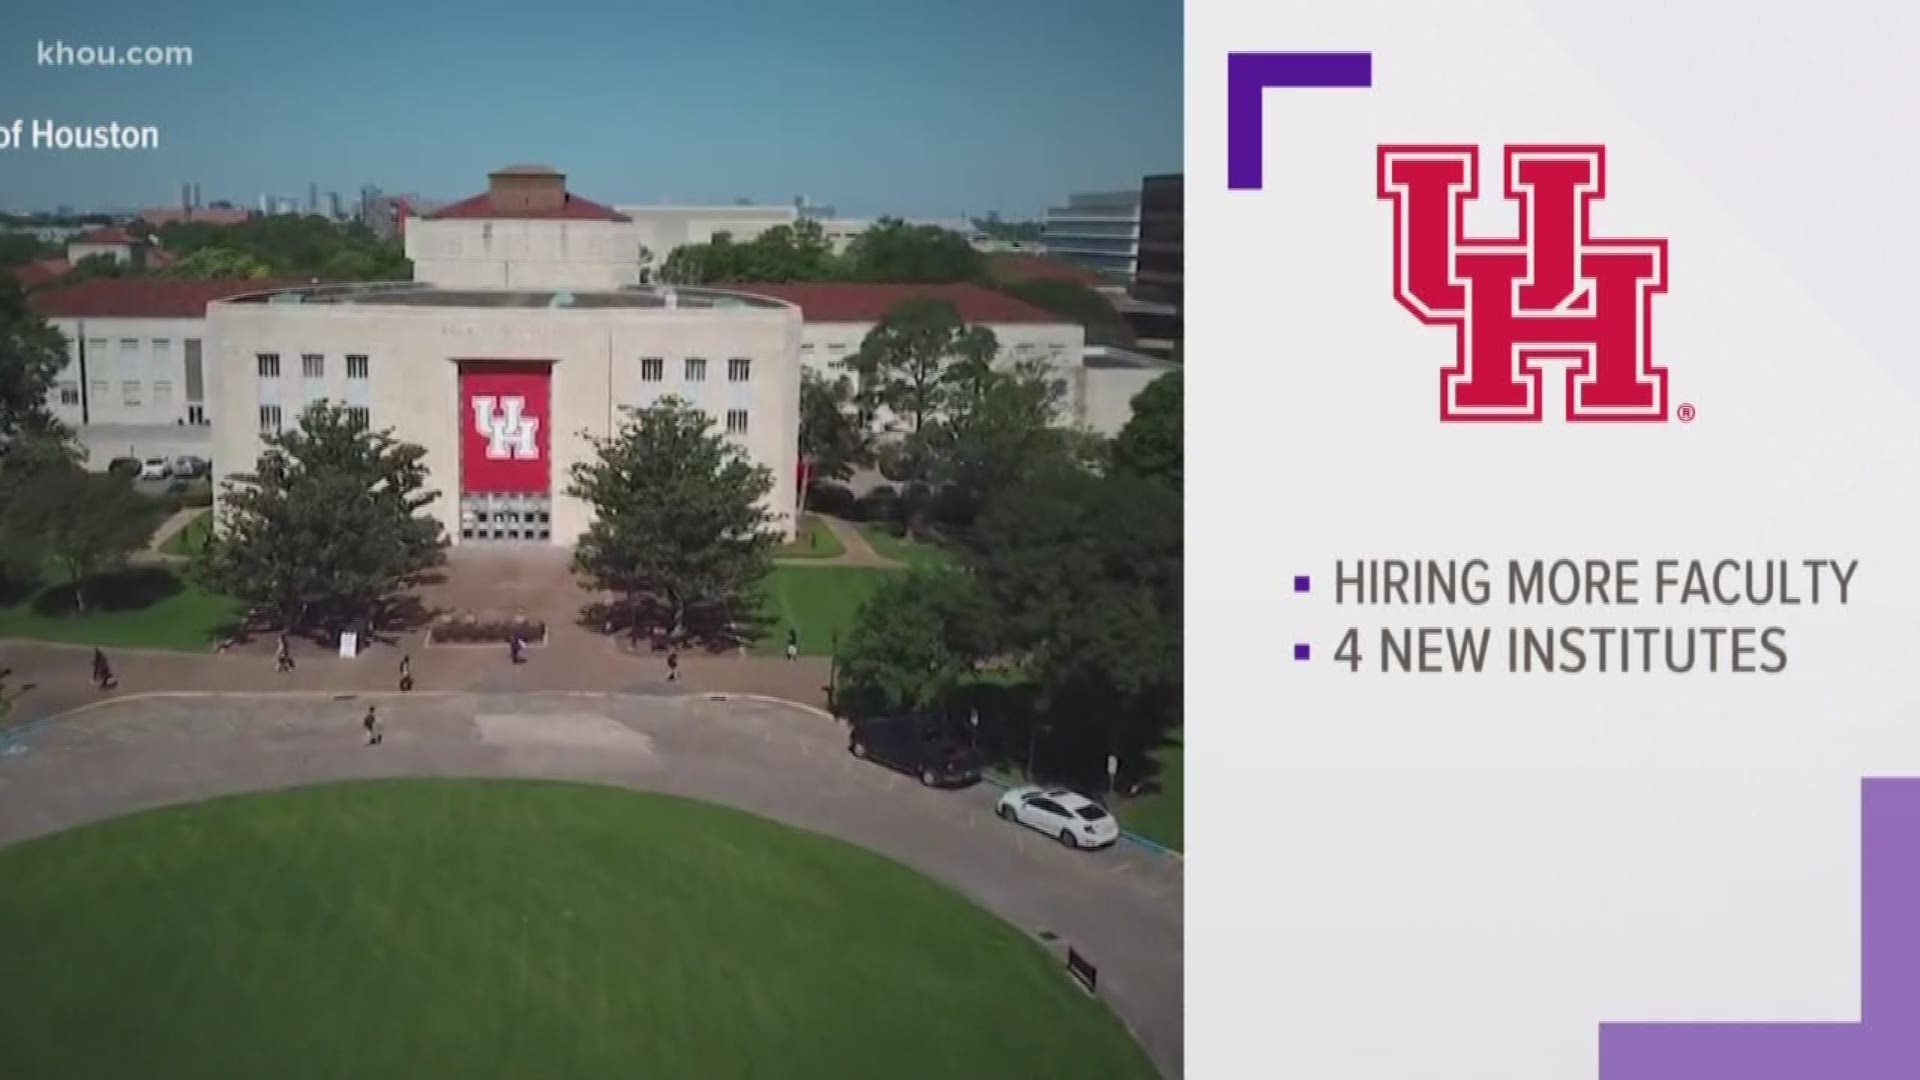 The University of Houston says it's received a "historic" donation.